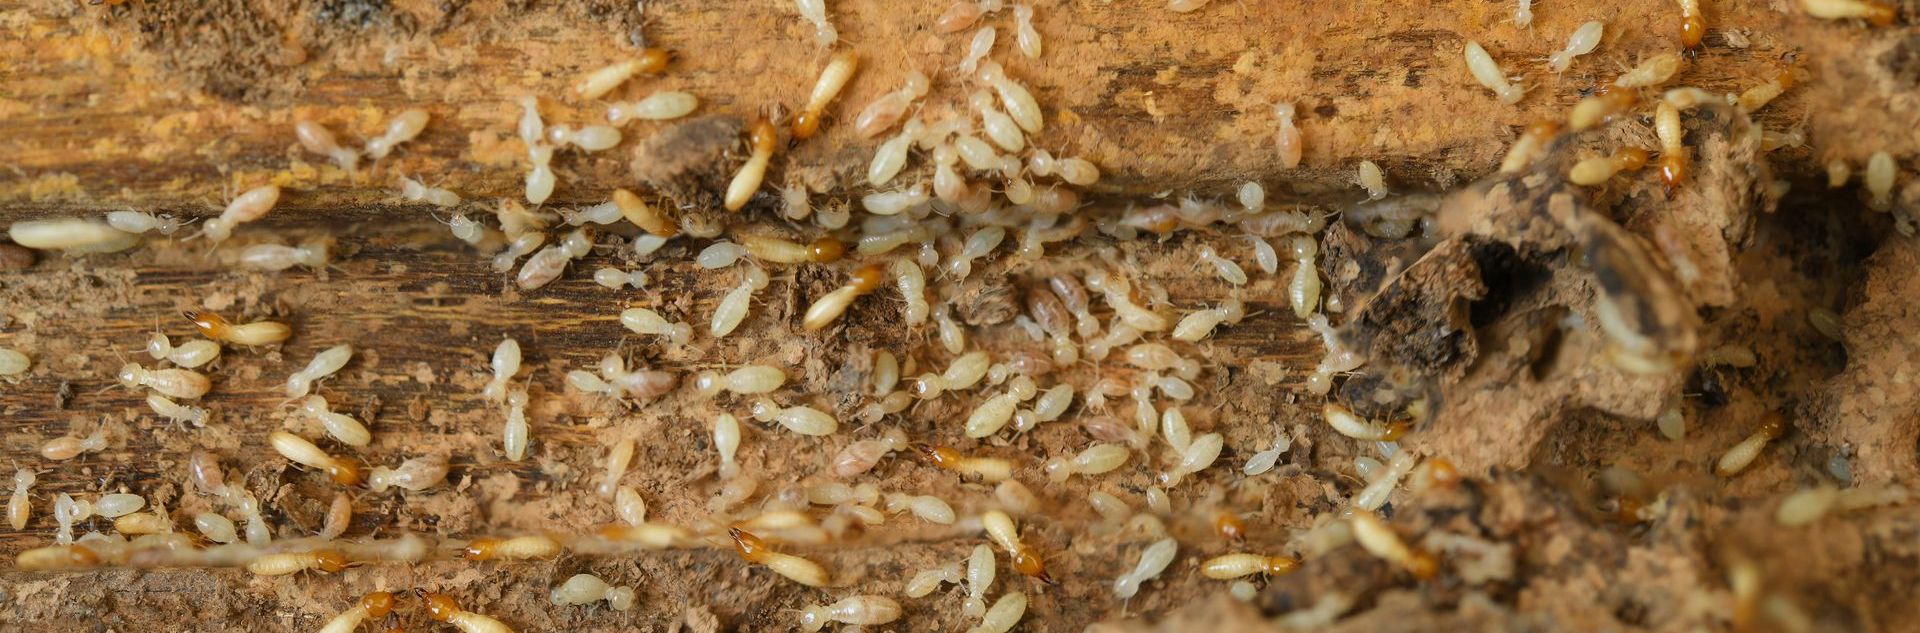 Termite Swarms | What to Do When You Spot Them
